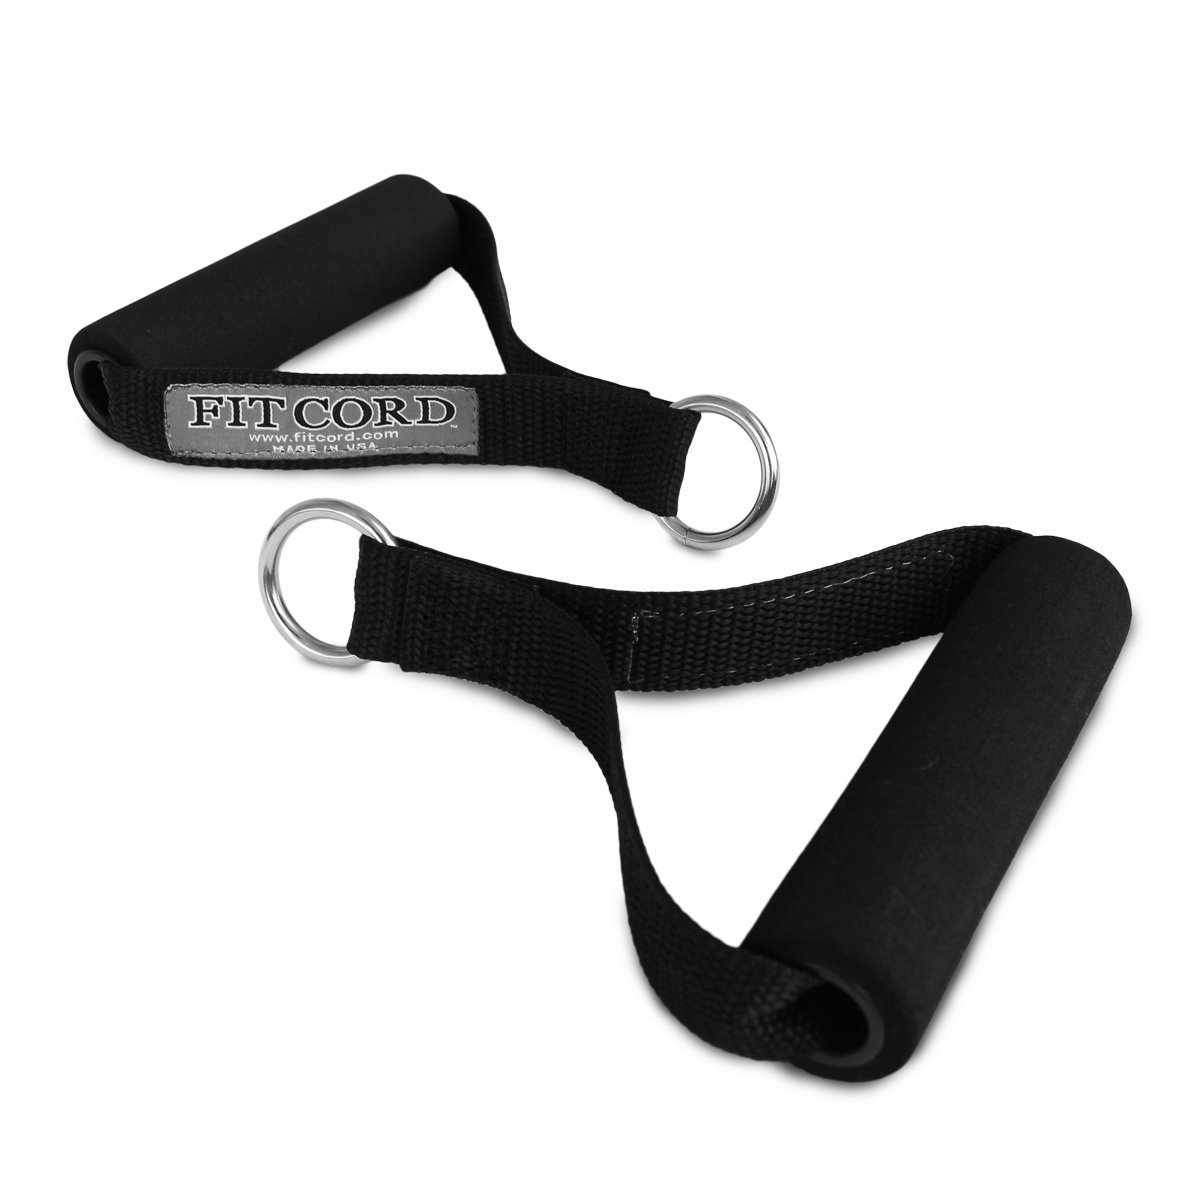 Body Sculpting Band Padded Handles - FitCord Resistance Bands Sculpting Band Padded Handles-FitCord Resistance Bands